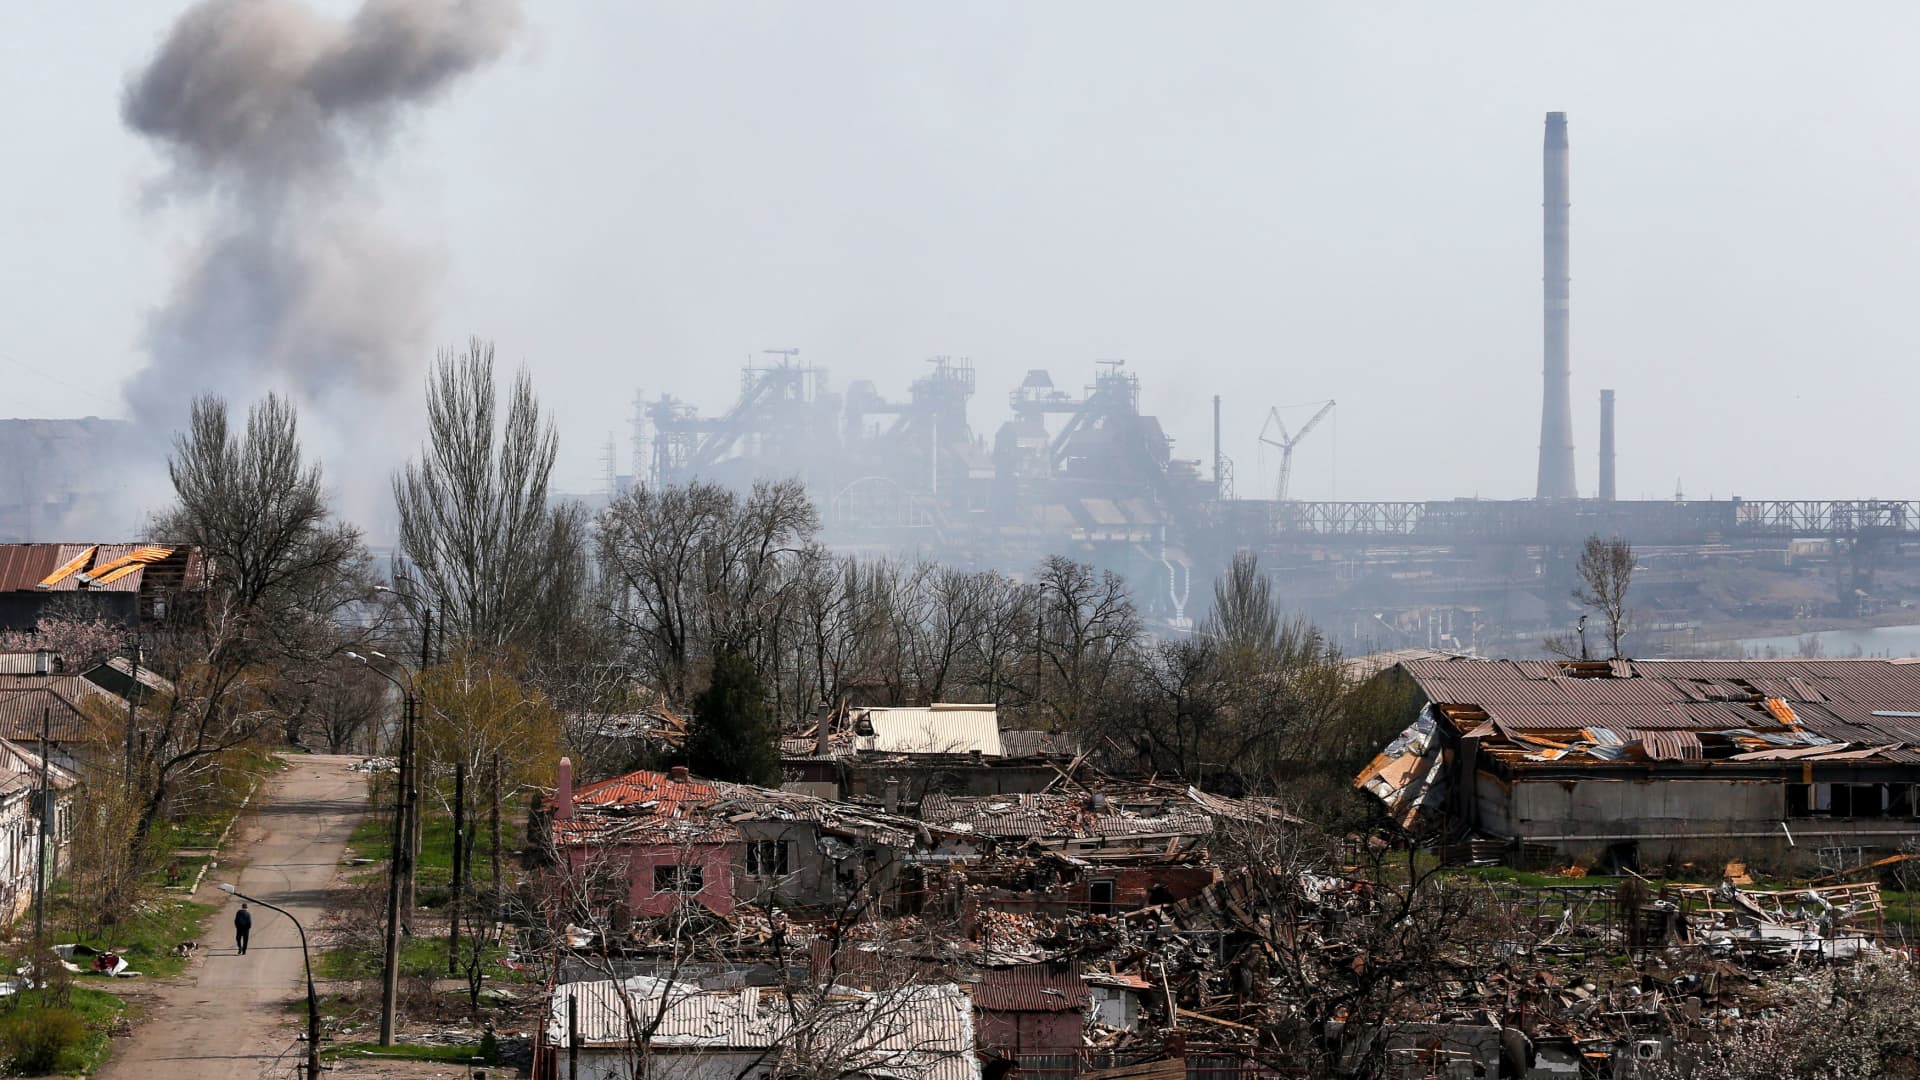 Russia sets new deadline for Mariupol surrender; Ukraine troops there facing ‘last days if not hours’ – CNBC